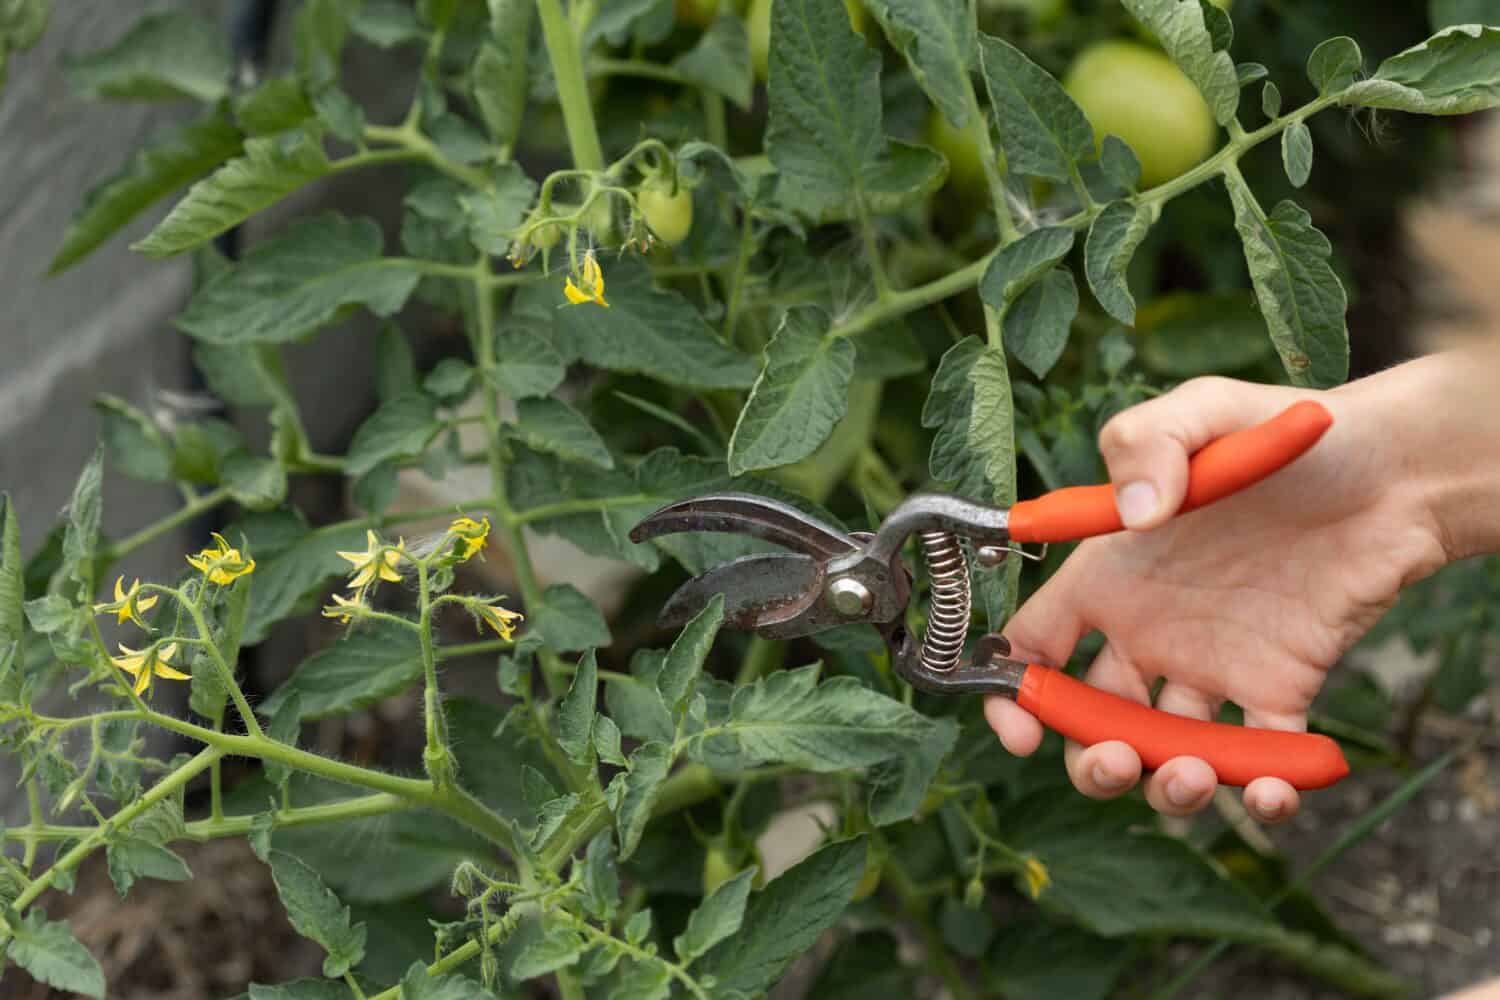 cutting tomatoes with pliers in the garden